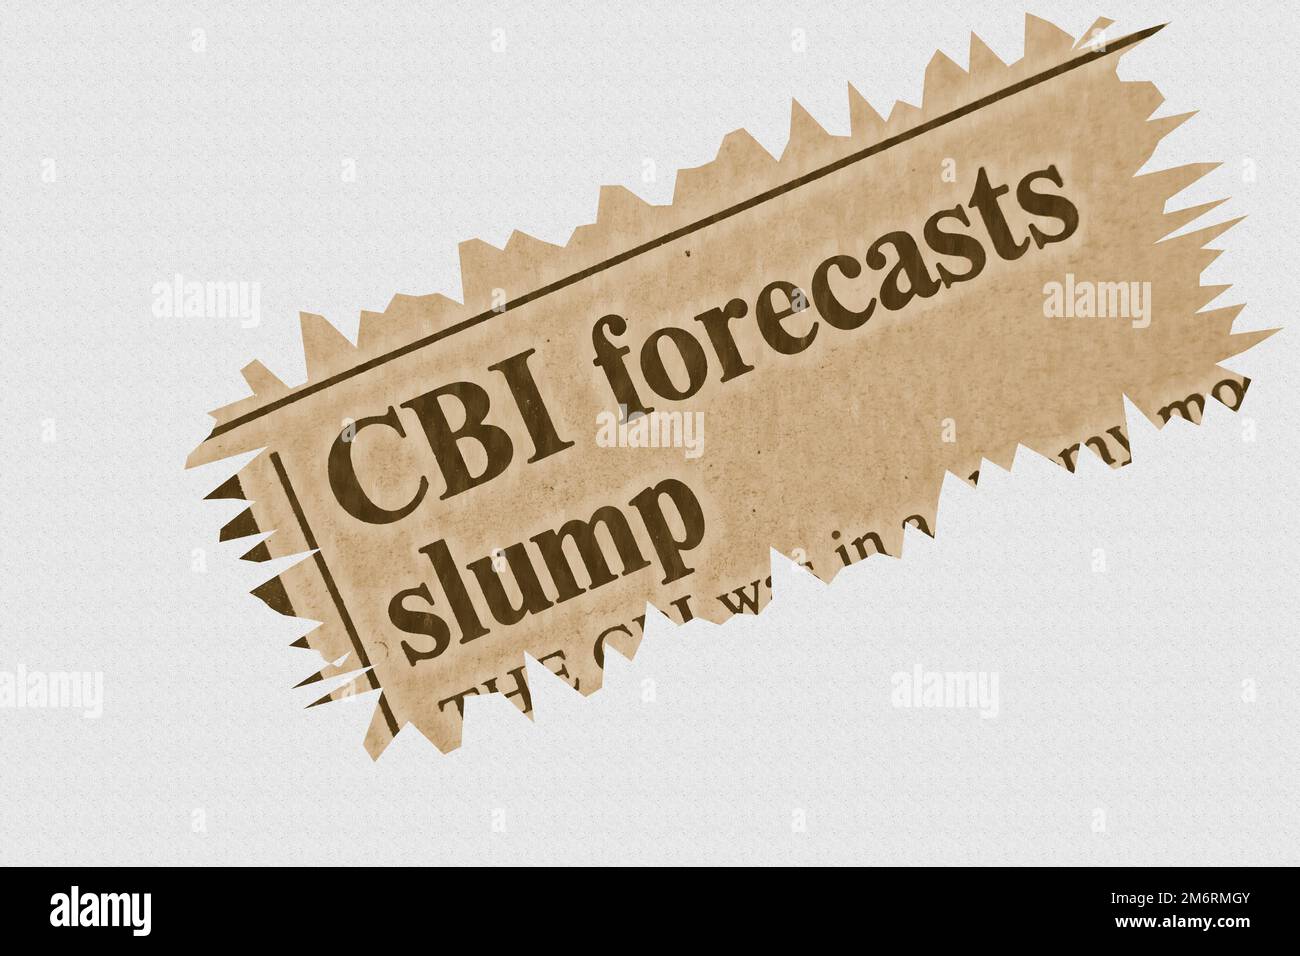 CBI forecasts slump - news story from 1975 newspaper headline article title with highlighted overlay Stock Photo